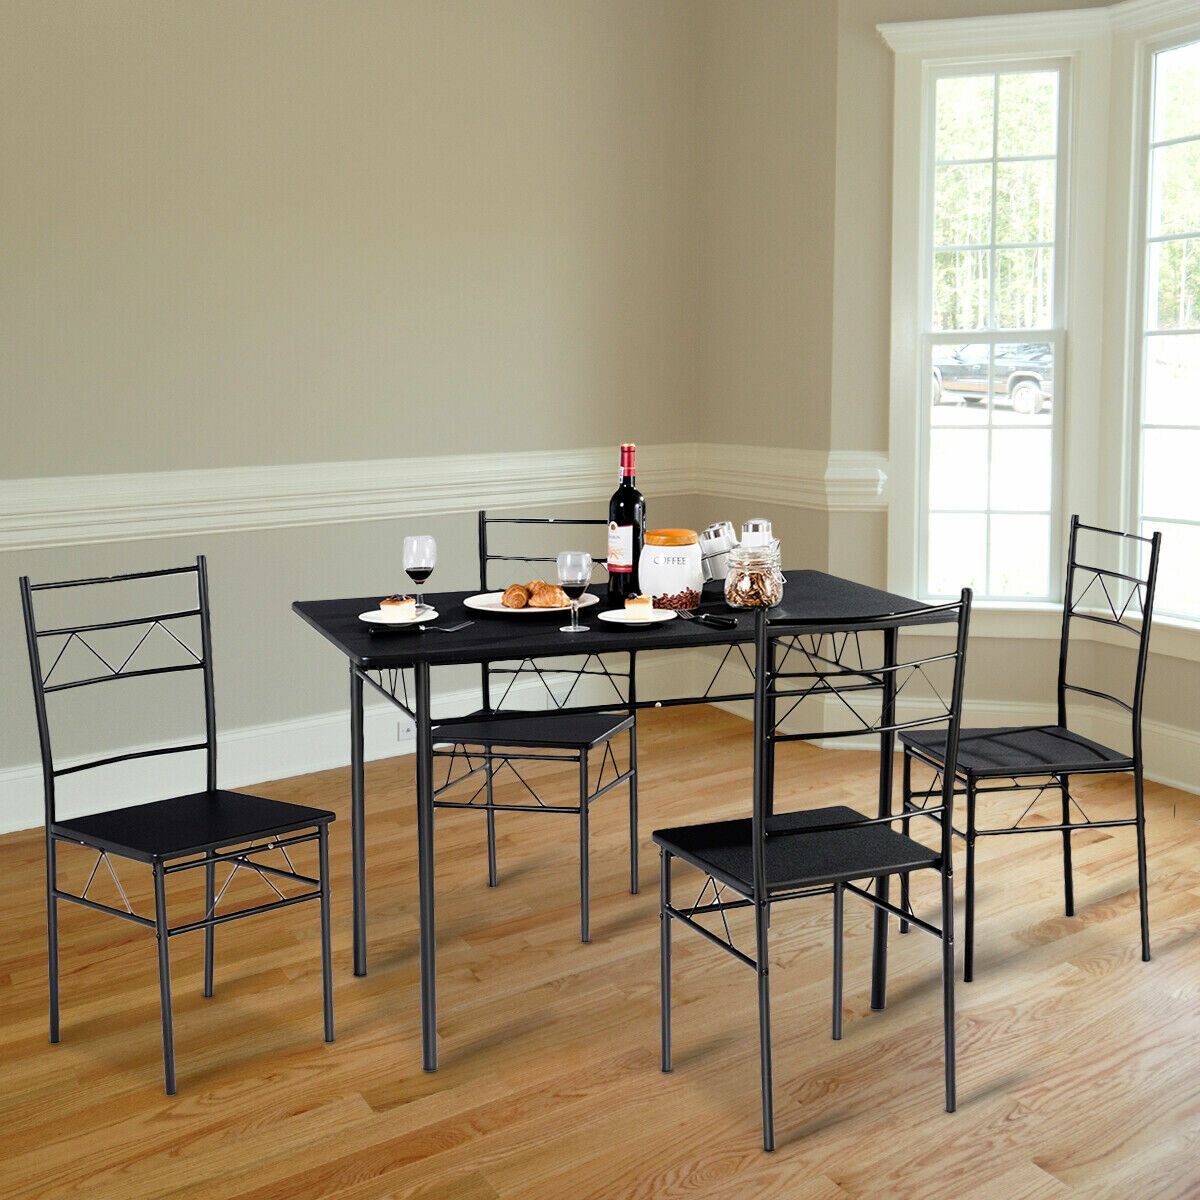 Details About August Grove Helfer 5 Piece Breakfast Nook Dining Set Within 2018 5 Piece Breakfast Nook Dining Sets (Photo 35539 of 35622)